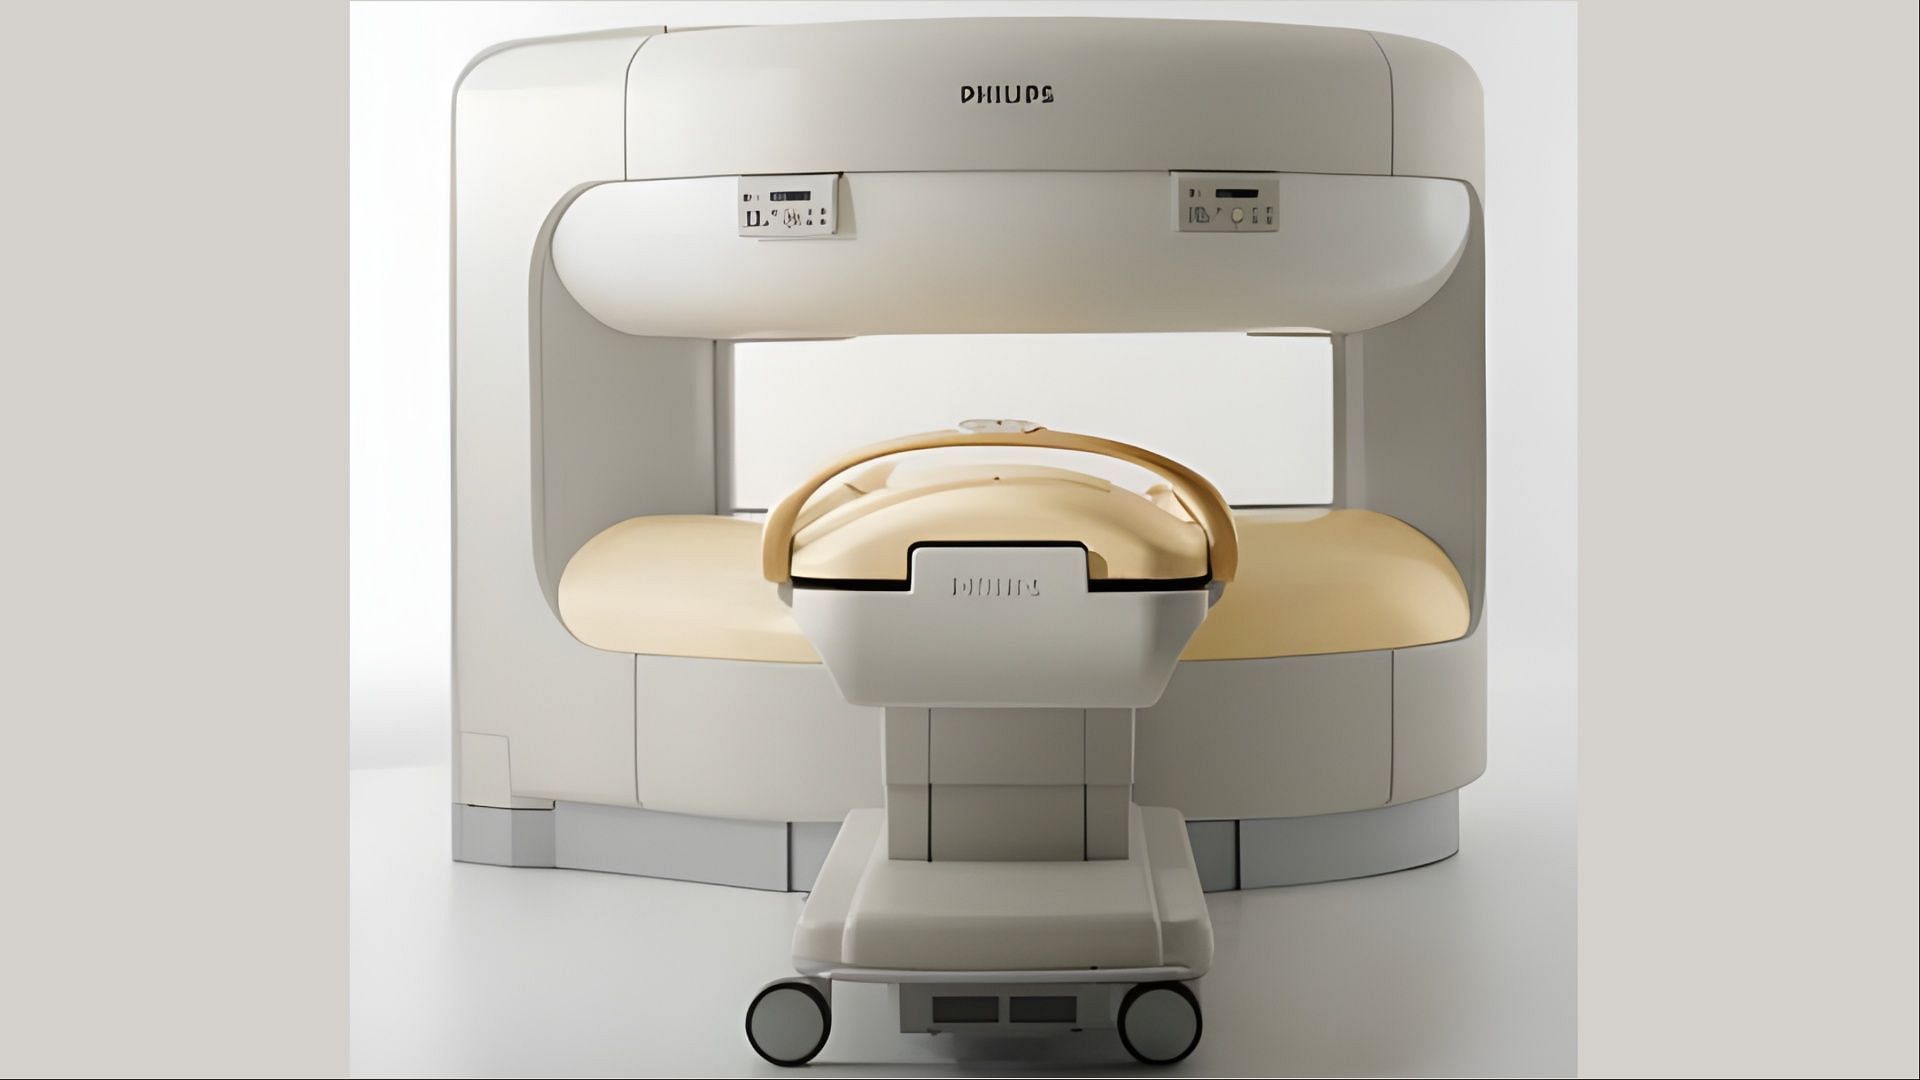 The recalled Panorama 1.0T HFO MRI Scanners pose risks of an explosion (Image via FDA)